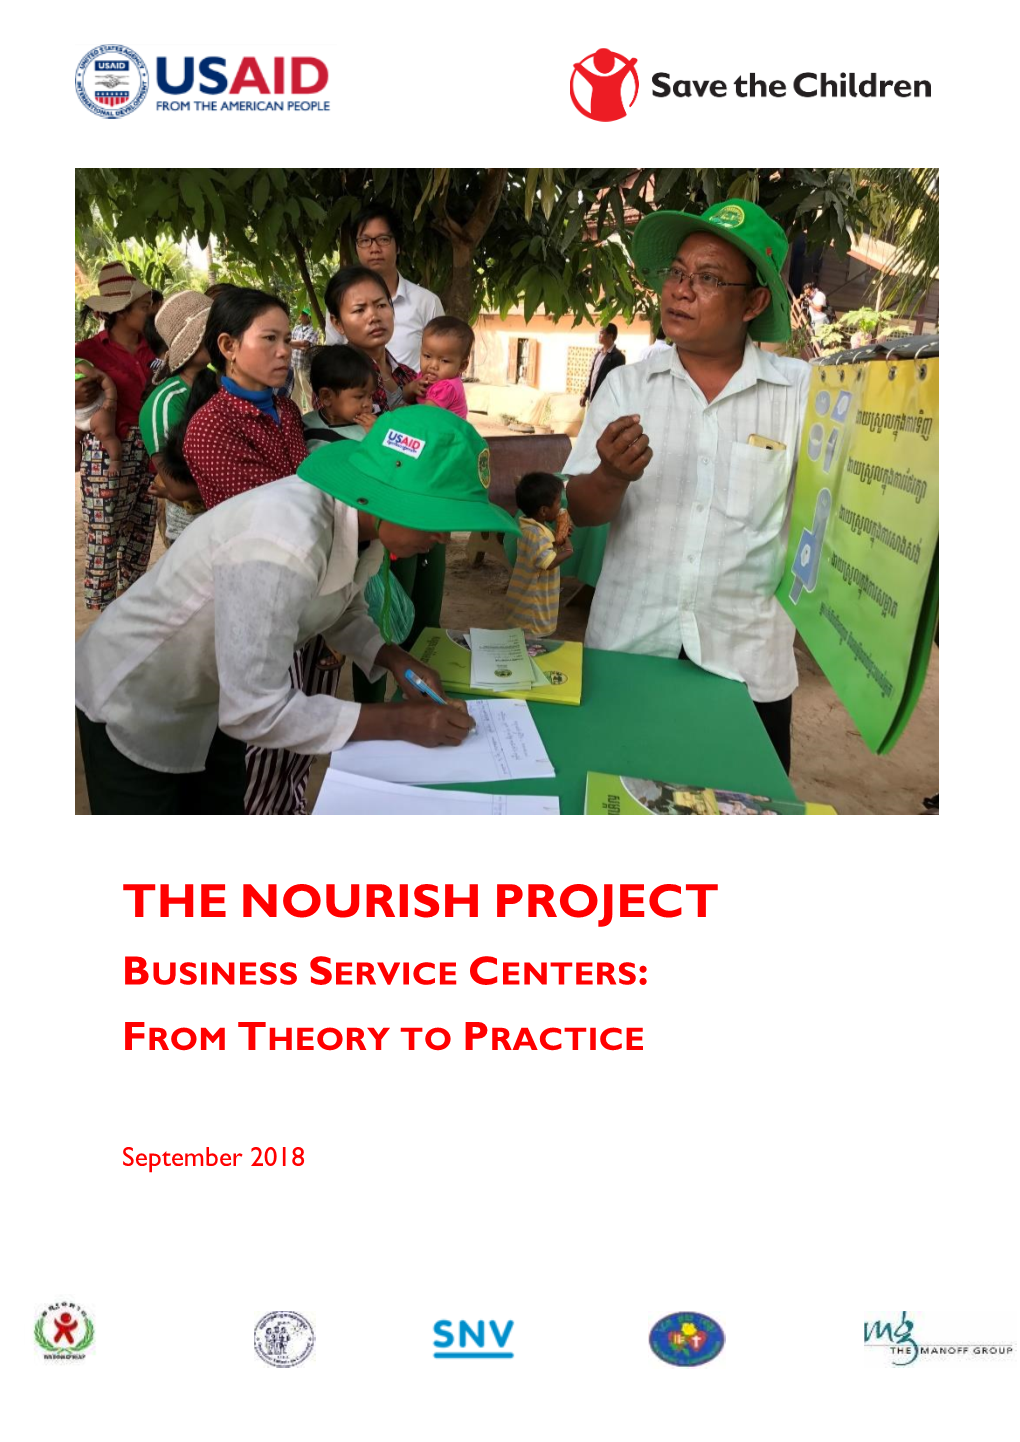 The Nourish Project Business Service Centers: from Theory to Practice